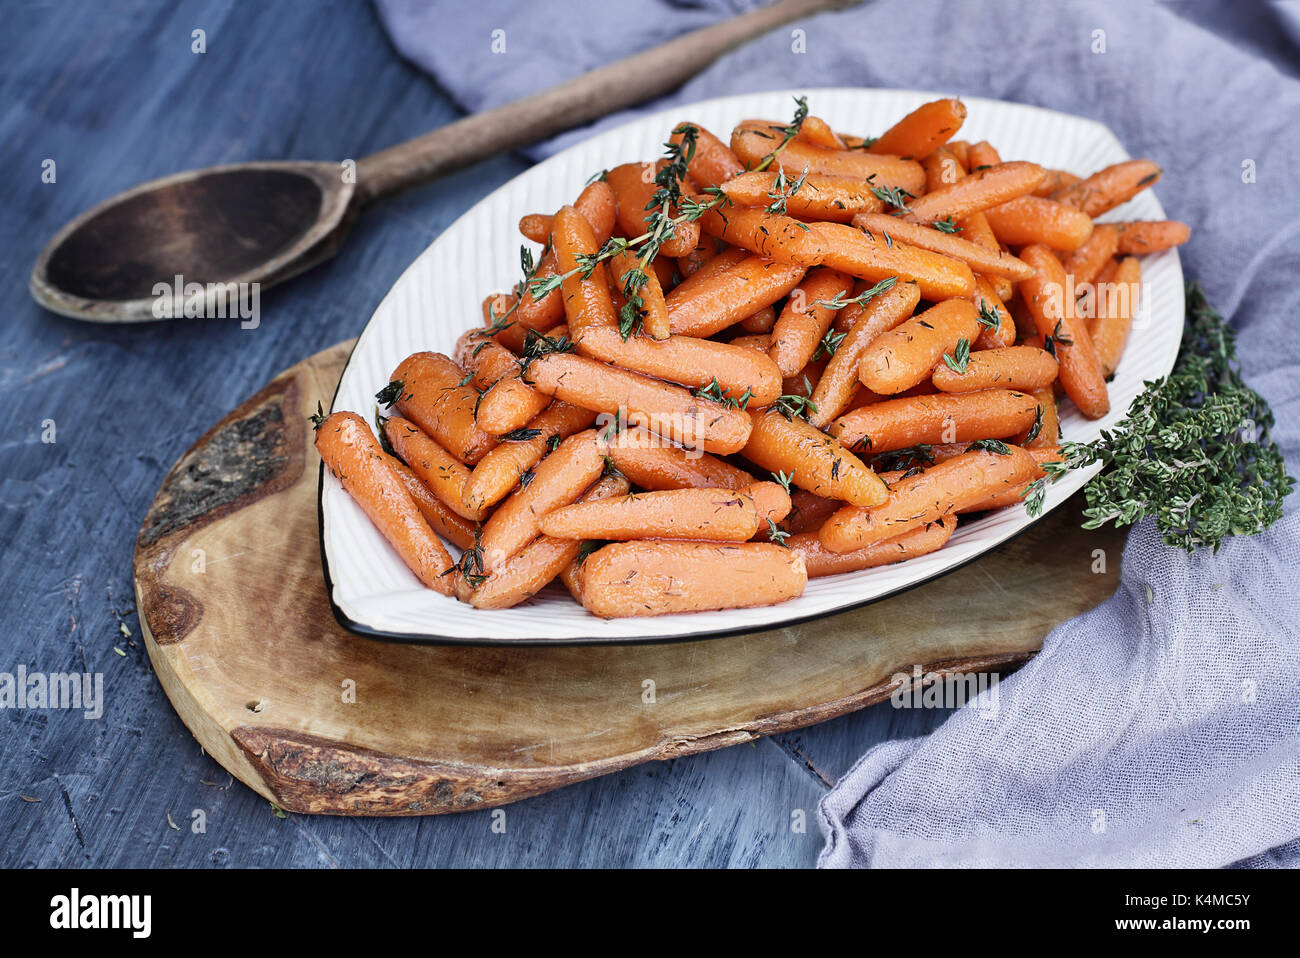 Honey Glazed Baby carrots with an old rustic wooden spoon and thyme. Extreme shallow depth of field with selective focus on carrots in the foreground. Stock Photo